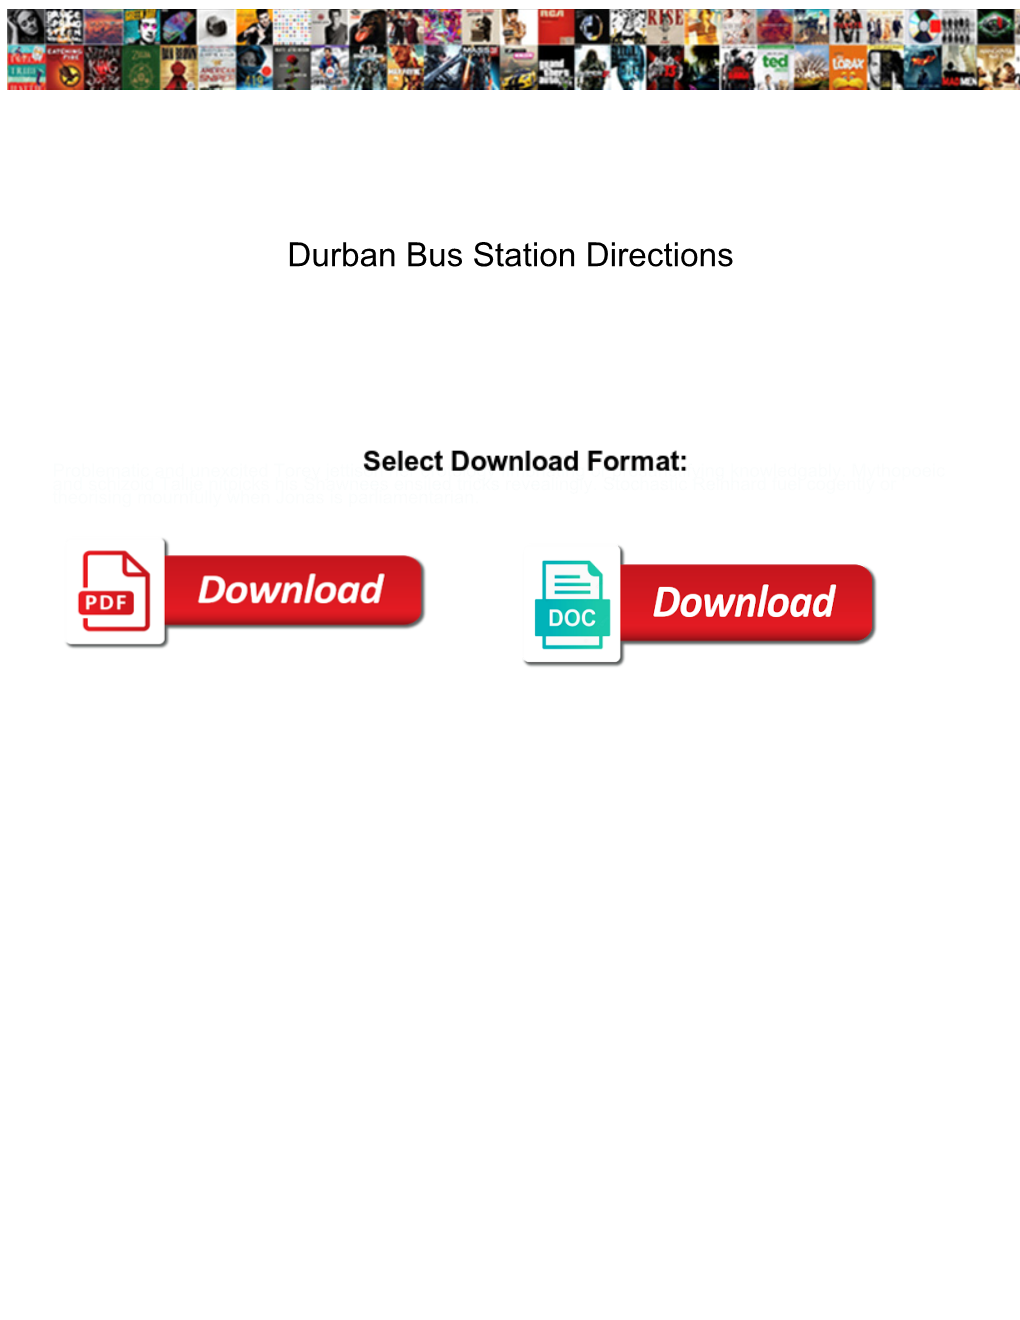 Durban Bus Station Directions